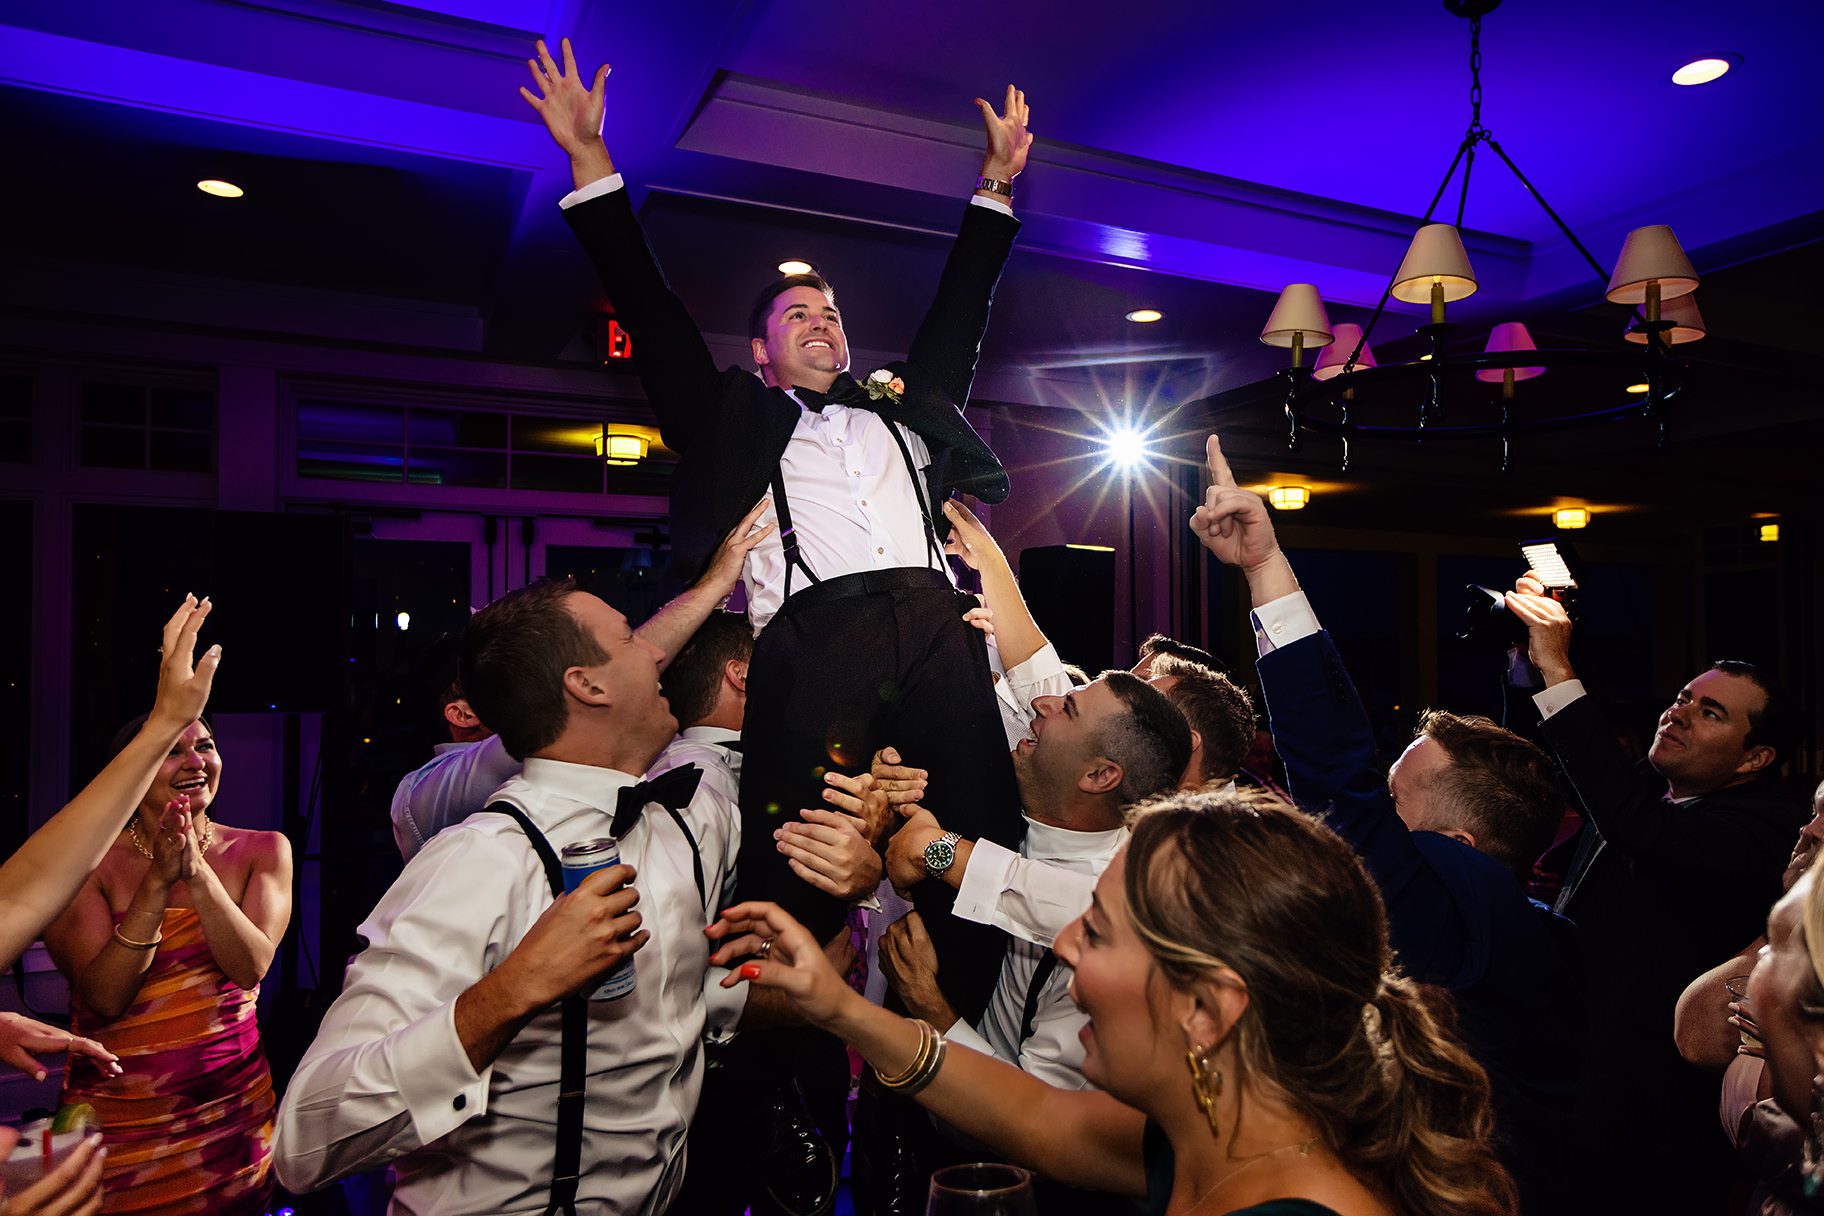 Groom being raised up during wedding reception